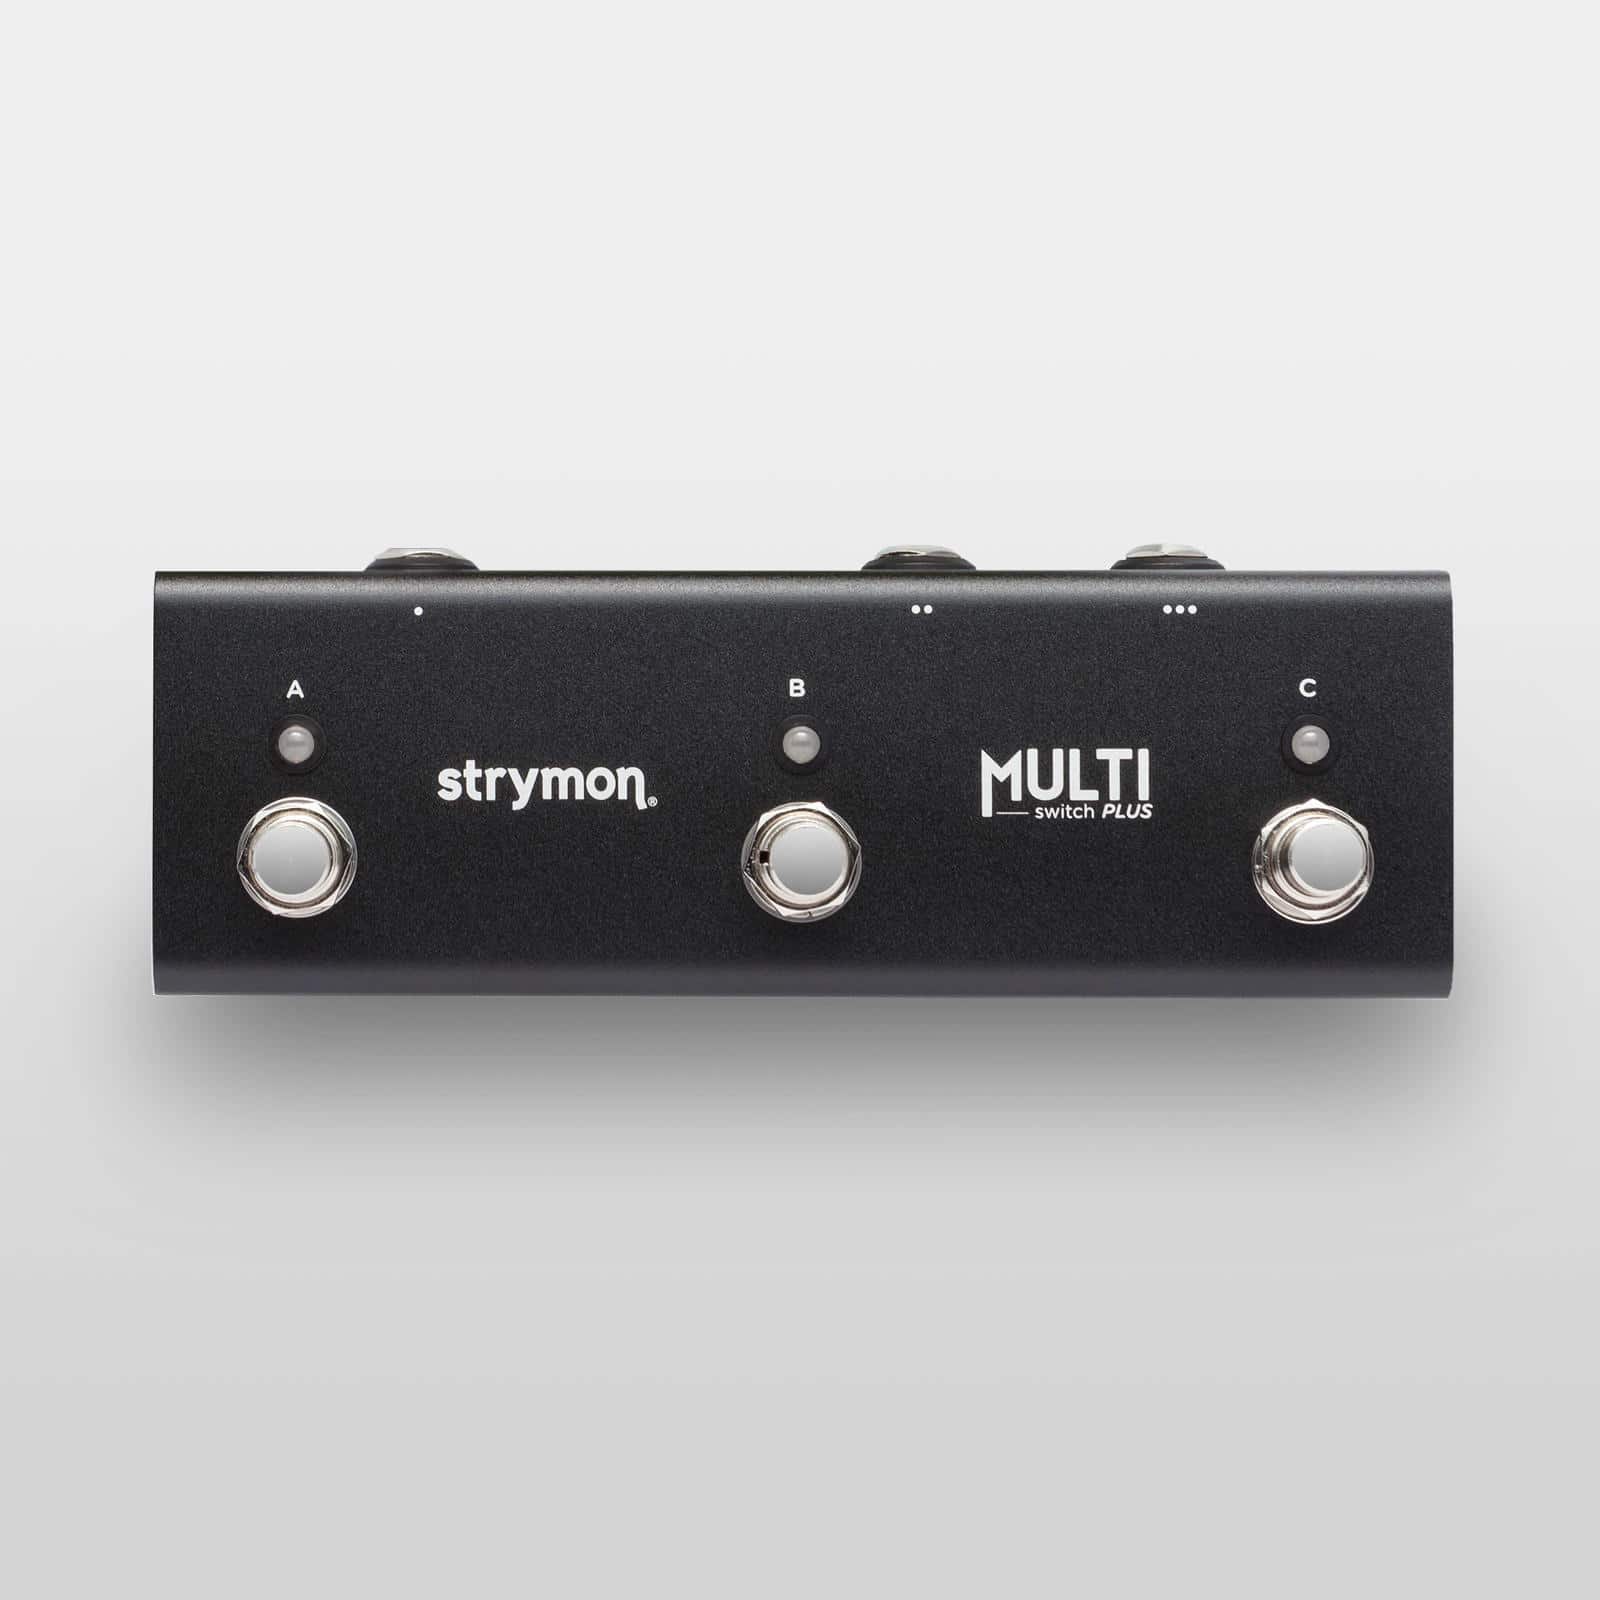 MultiSwitch Plus - For Sunset, Riverside, Volante, NightSky, and 